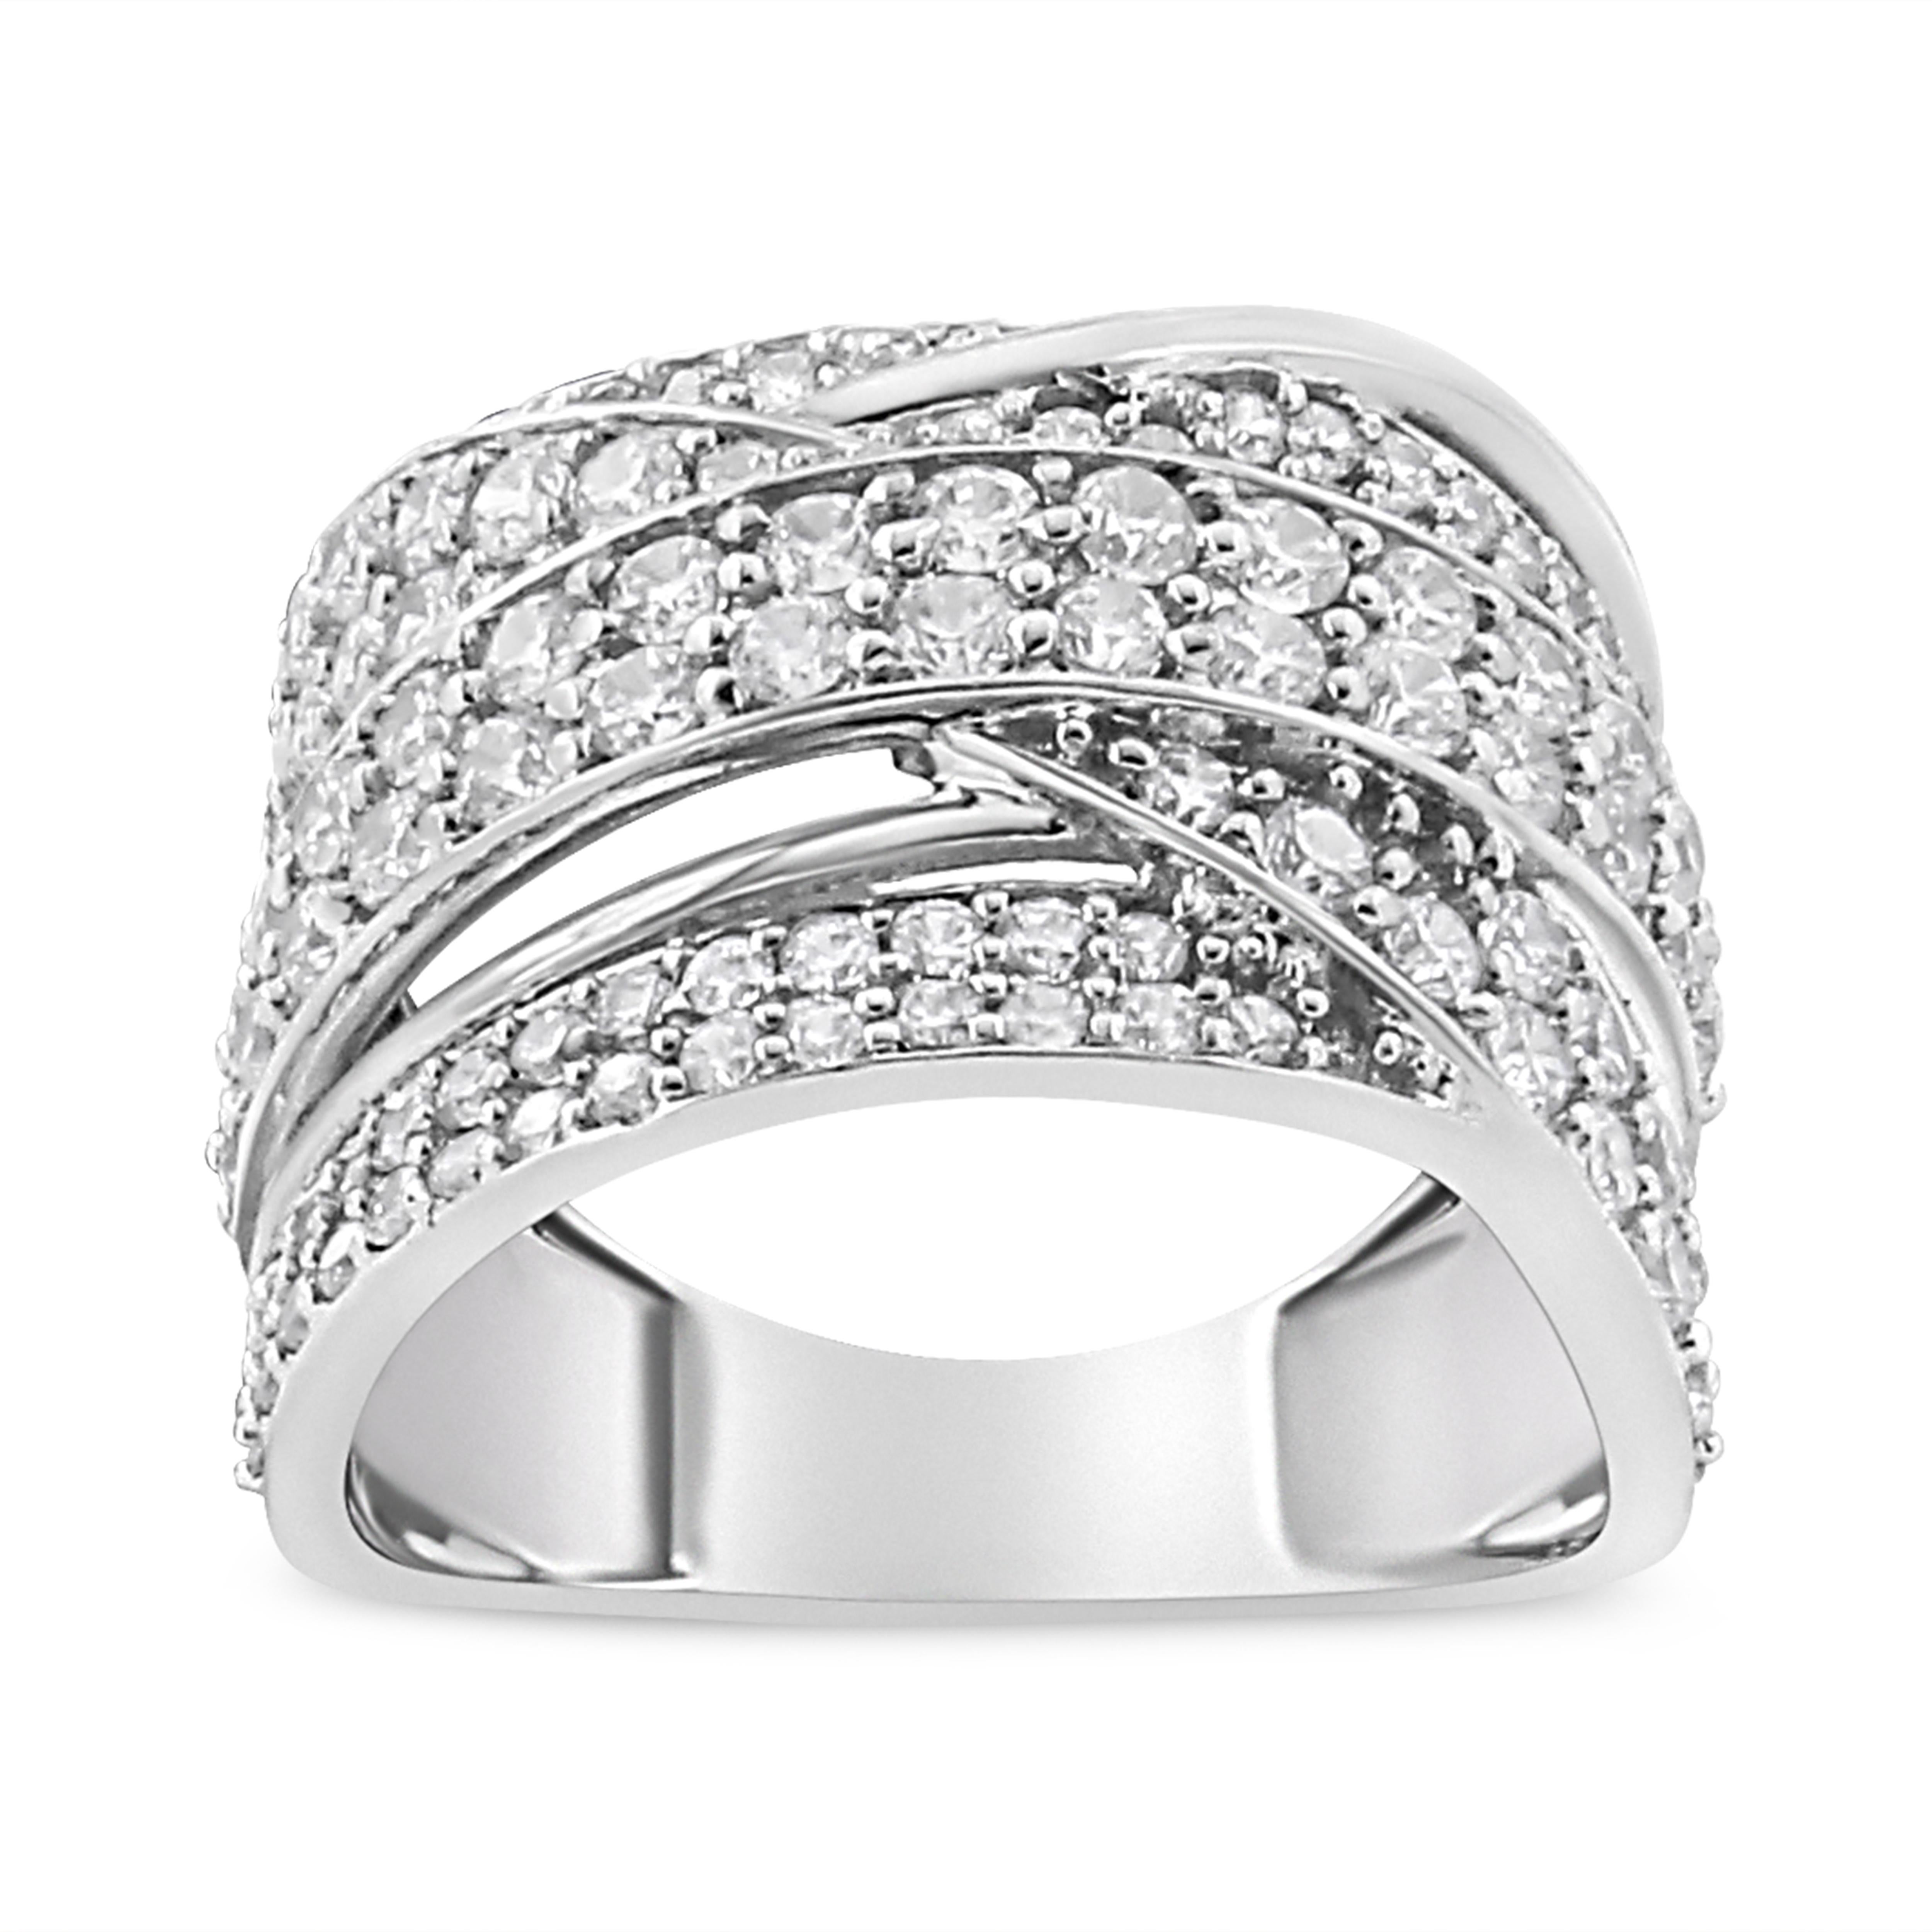 Bold and striking, this glamorous diamond band is crafted from genuine .925 sterling silver, a metal that will stay tarnish free for years to come. Boasting an impressive total carat weight of 2.00 c.t., this ring has bypass, overlapping design